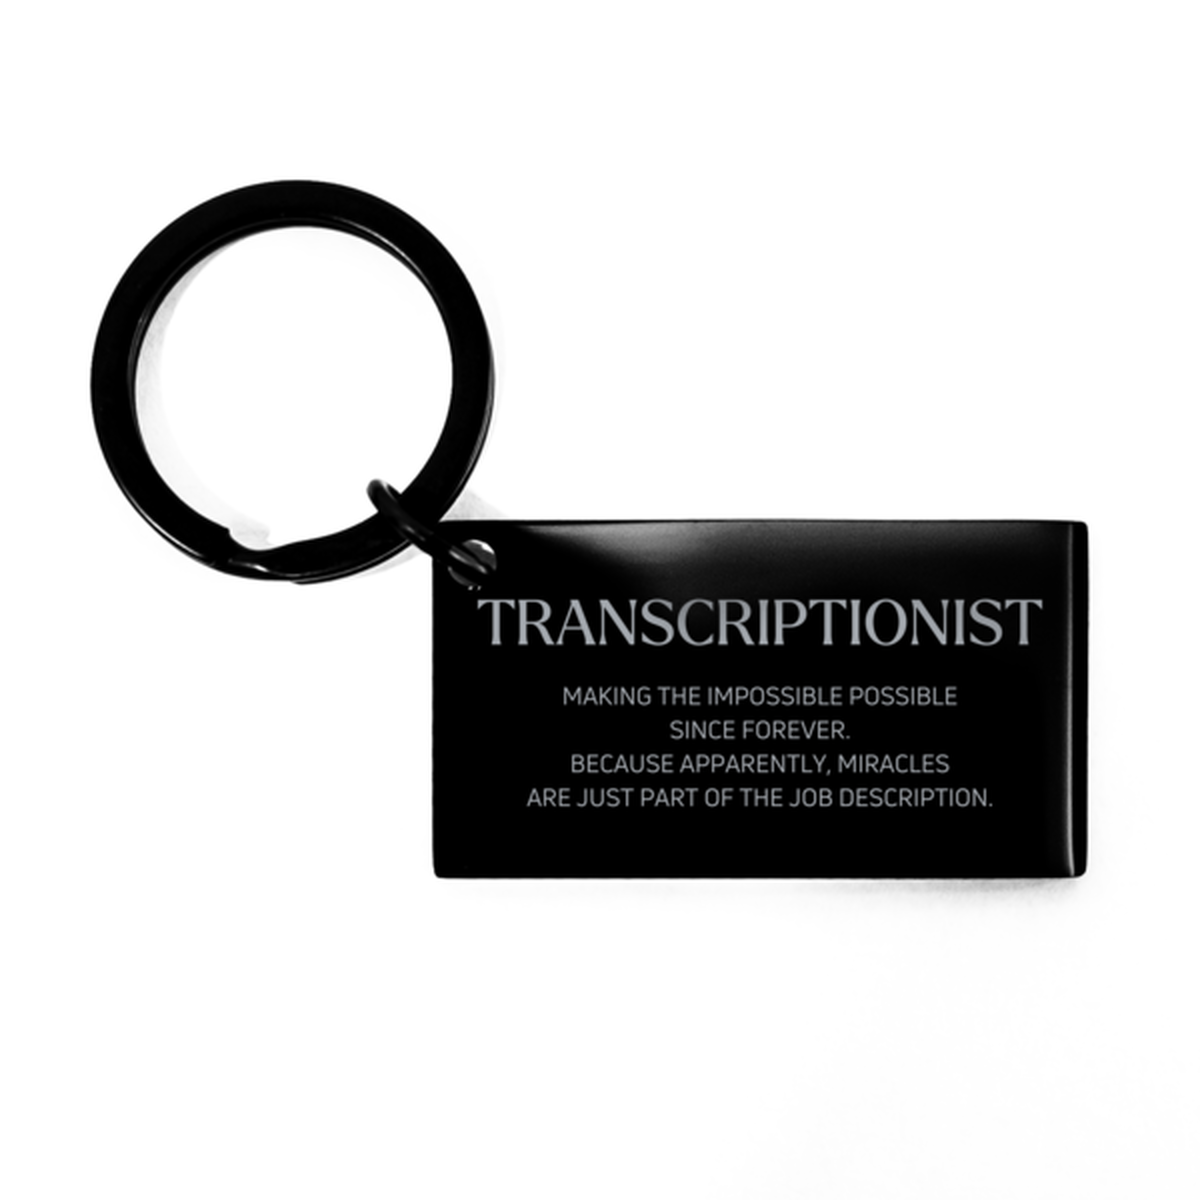 Funny Transcriptionist Gifts, Miracles are just part of the job description, Inspirational Birthday Keychain For Transcriptionist, Men, Women, Coworkers, Friends, Boss